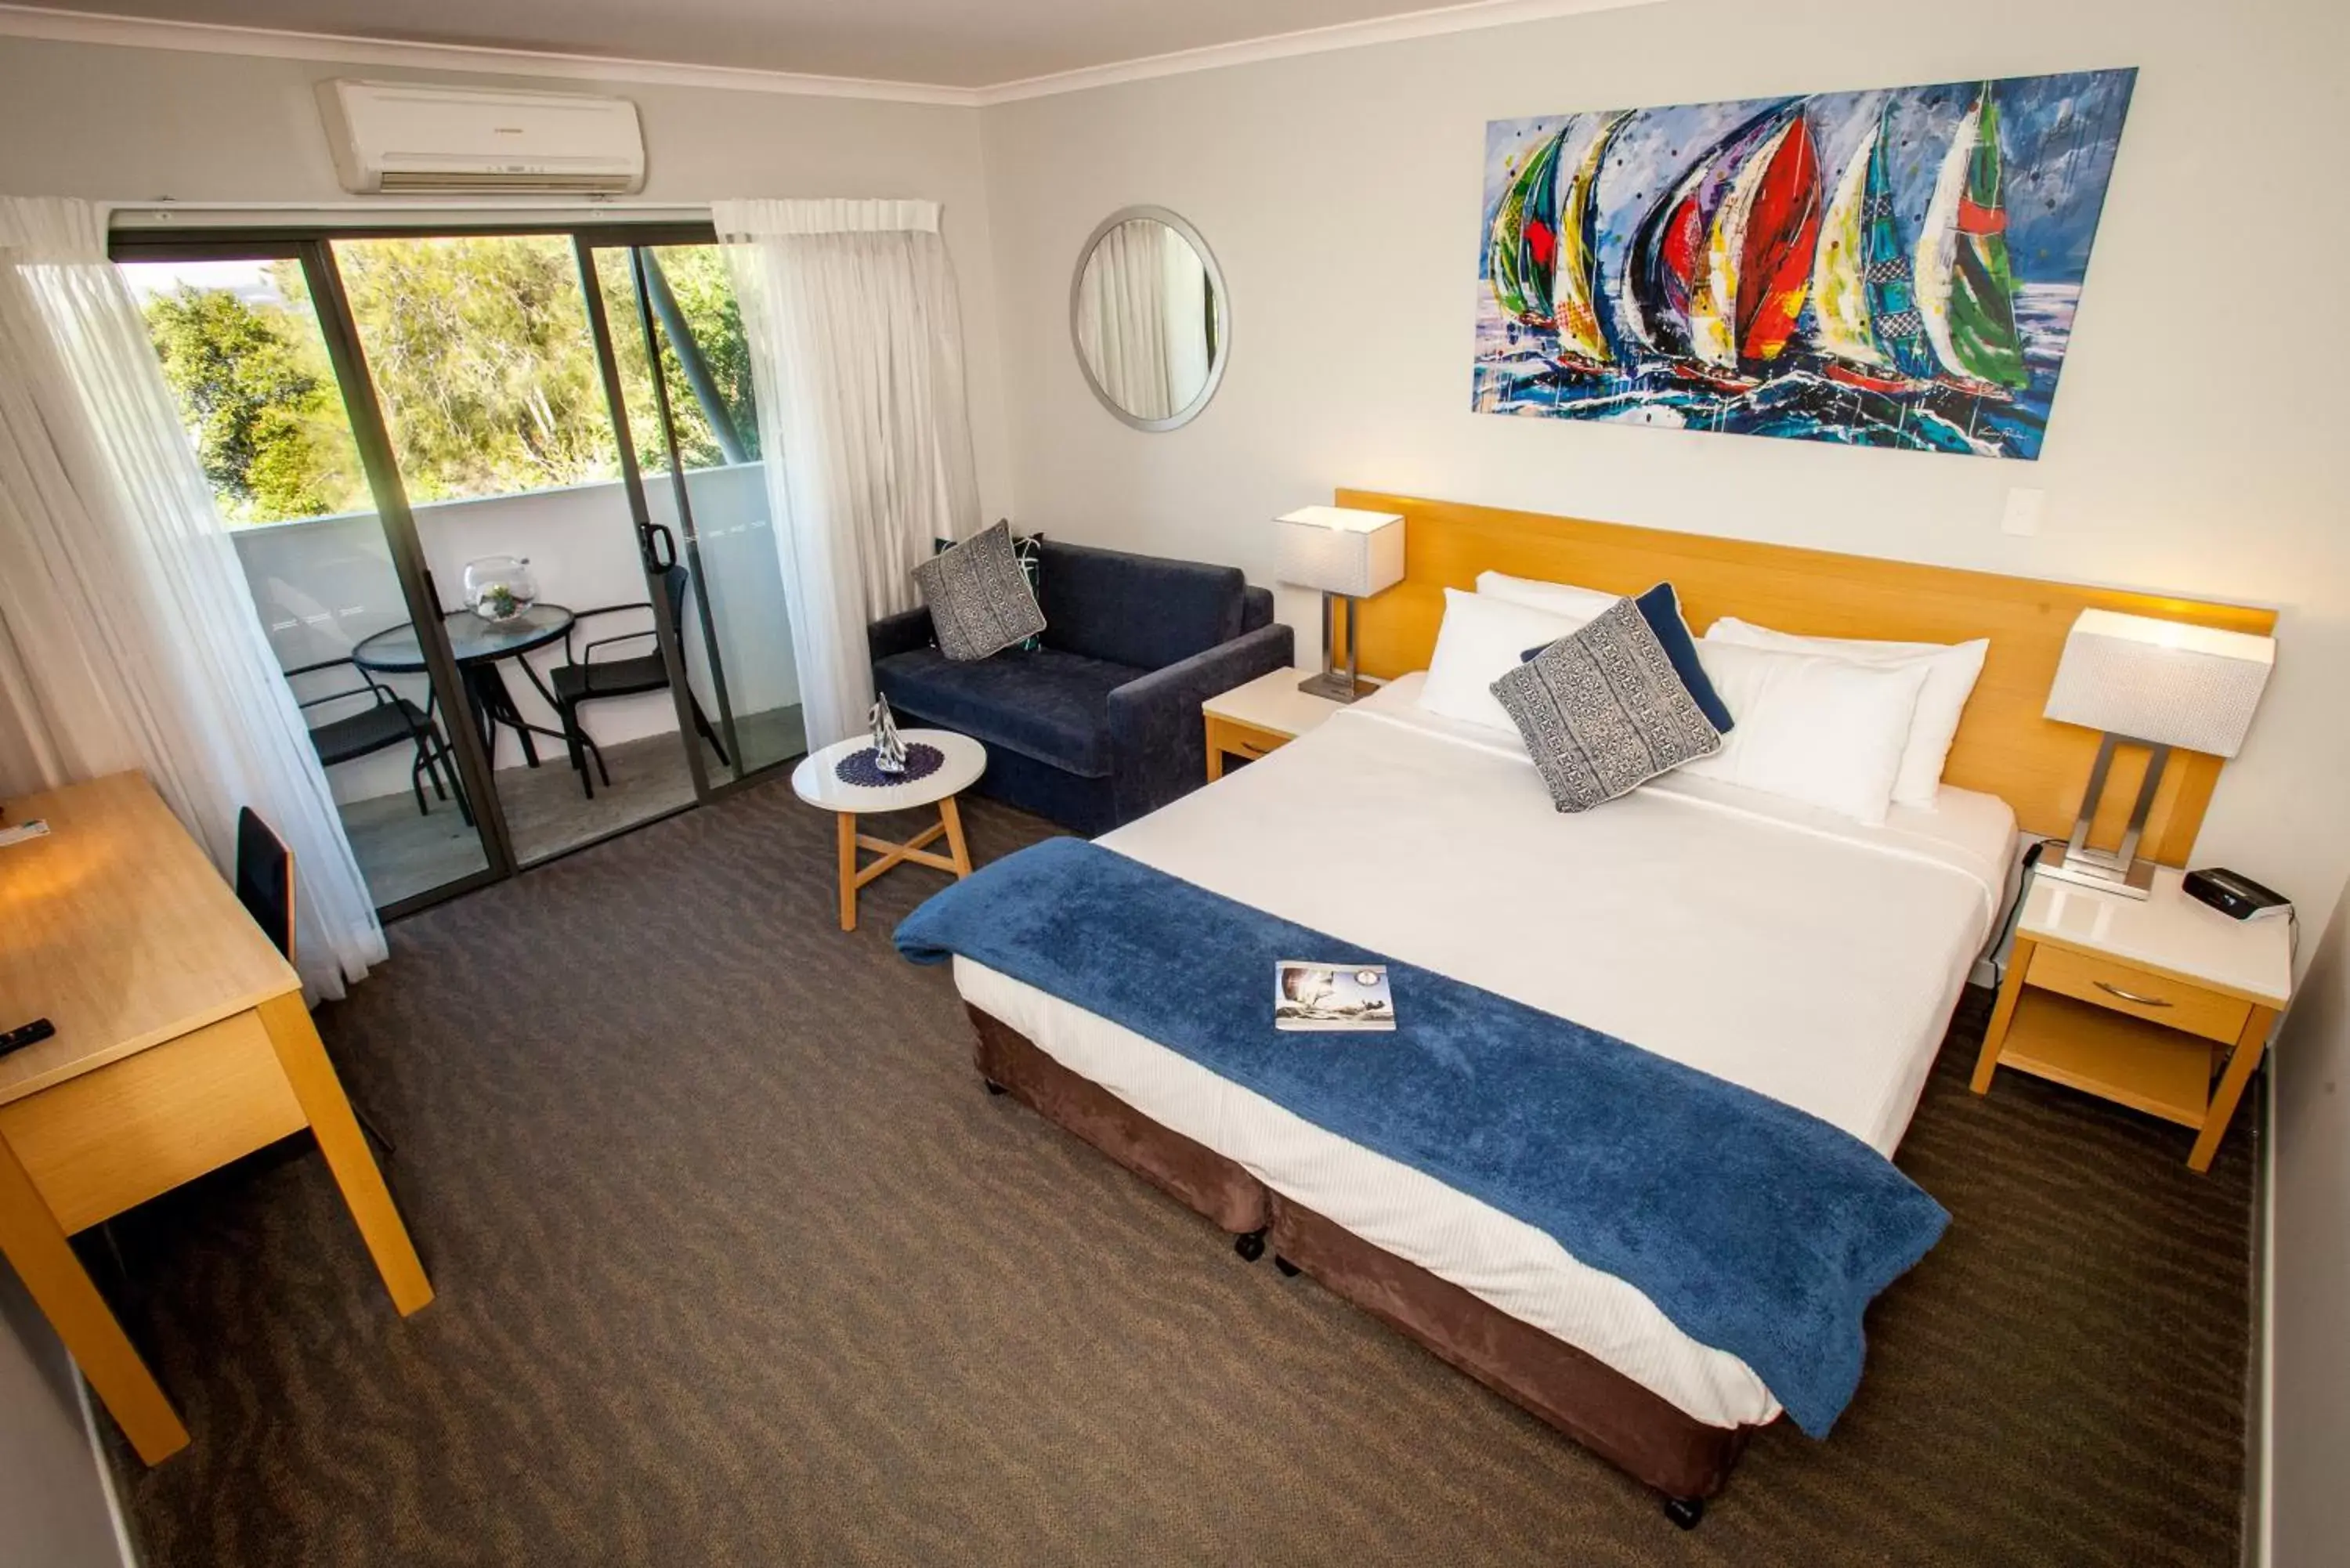 Day, Room Photo in Manly Marina Cove Motel